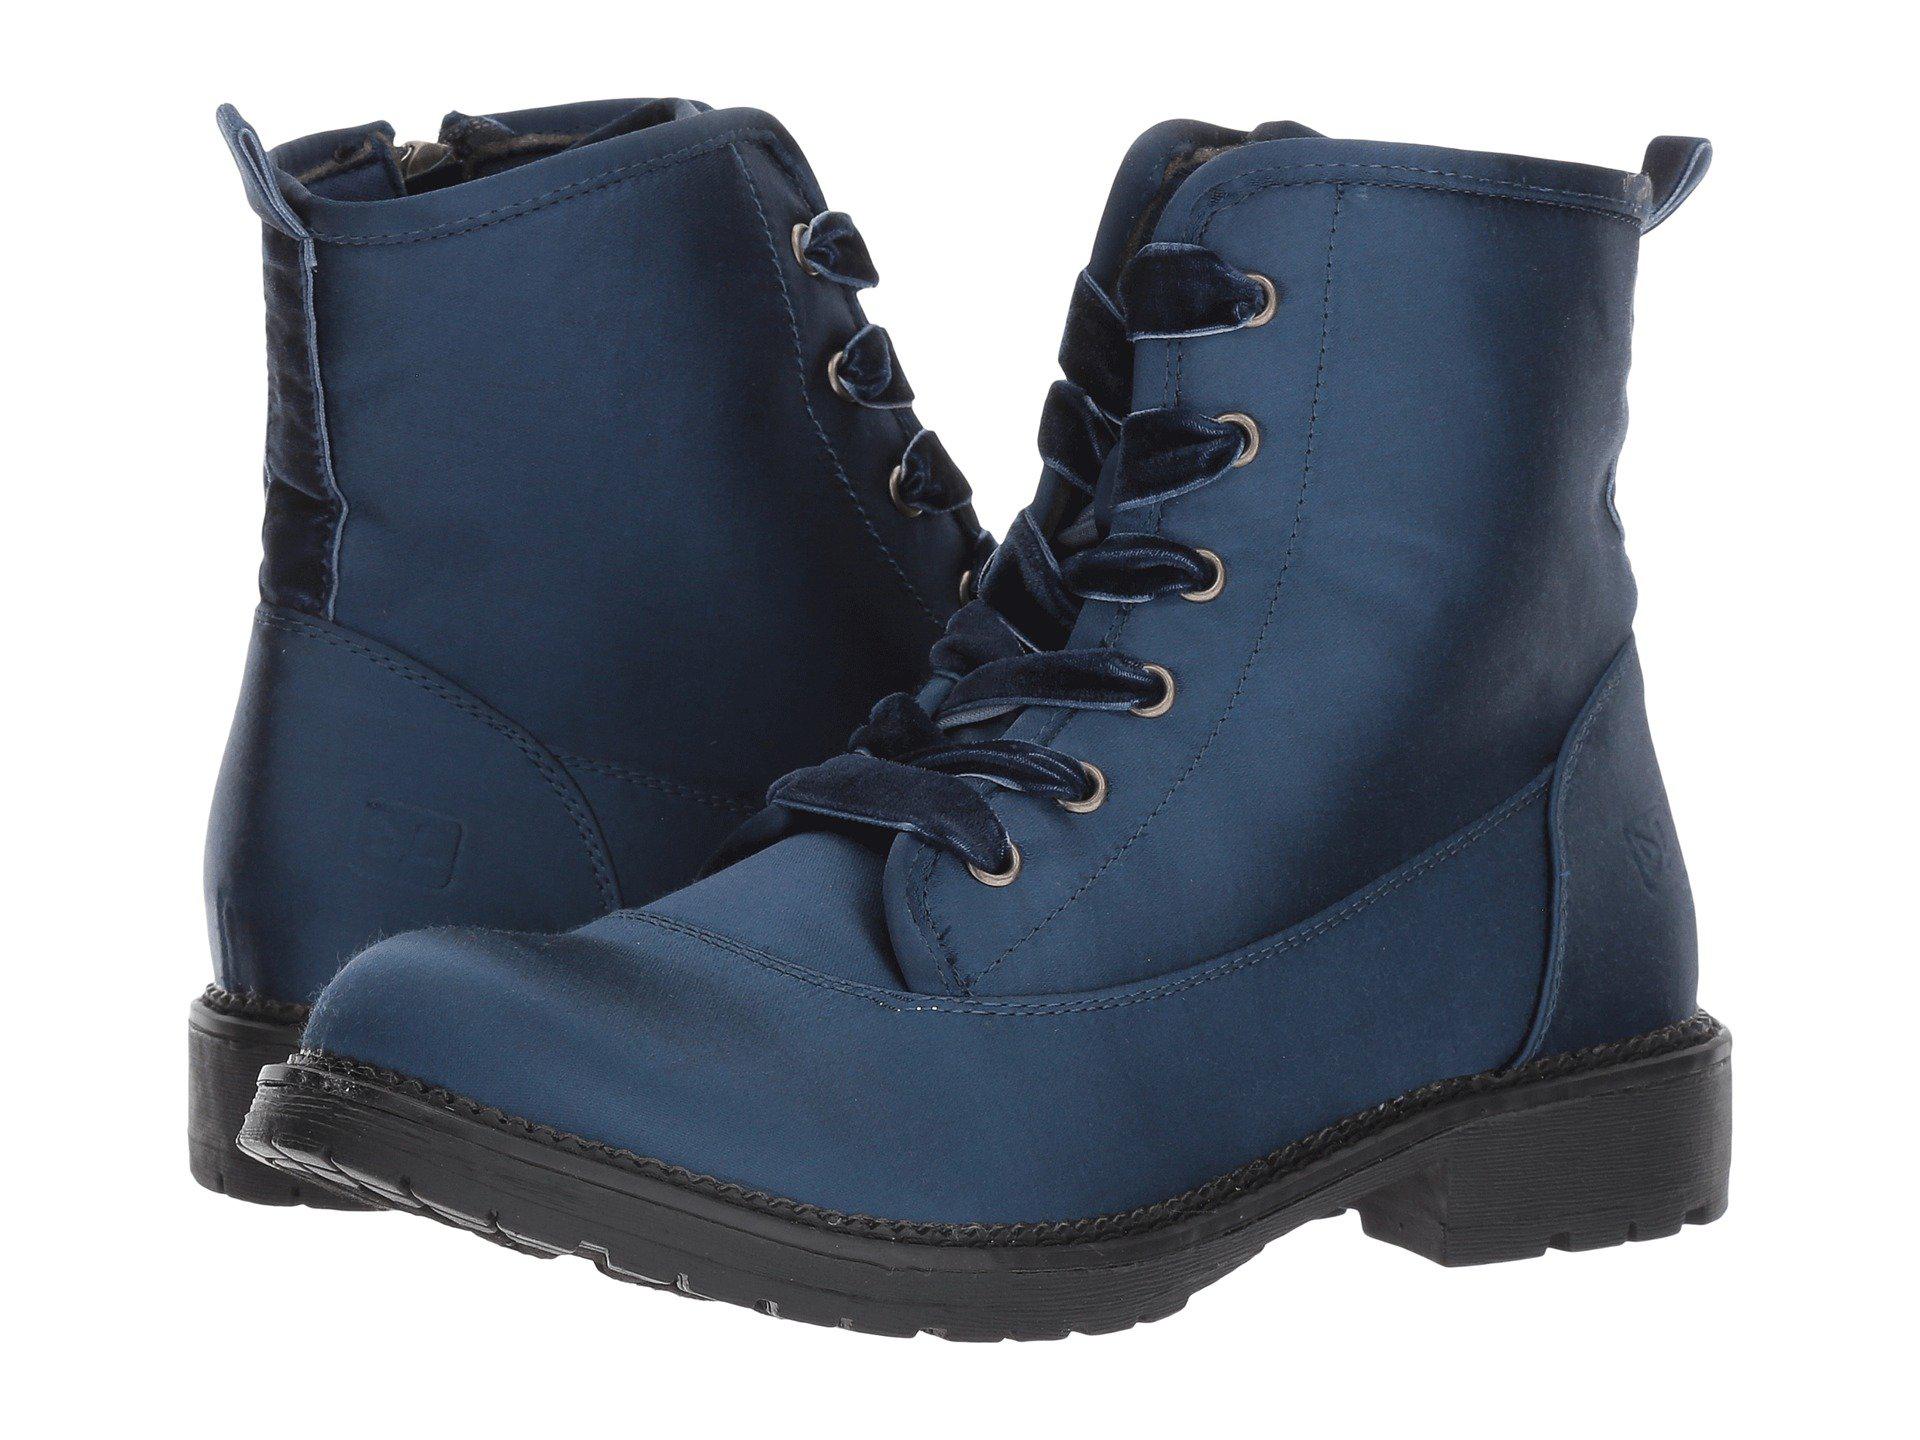 Dirty Laundry by Chinese Laundry Womens Rosario Combat Boot 